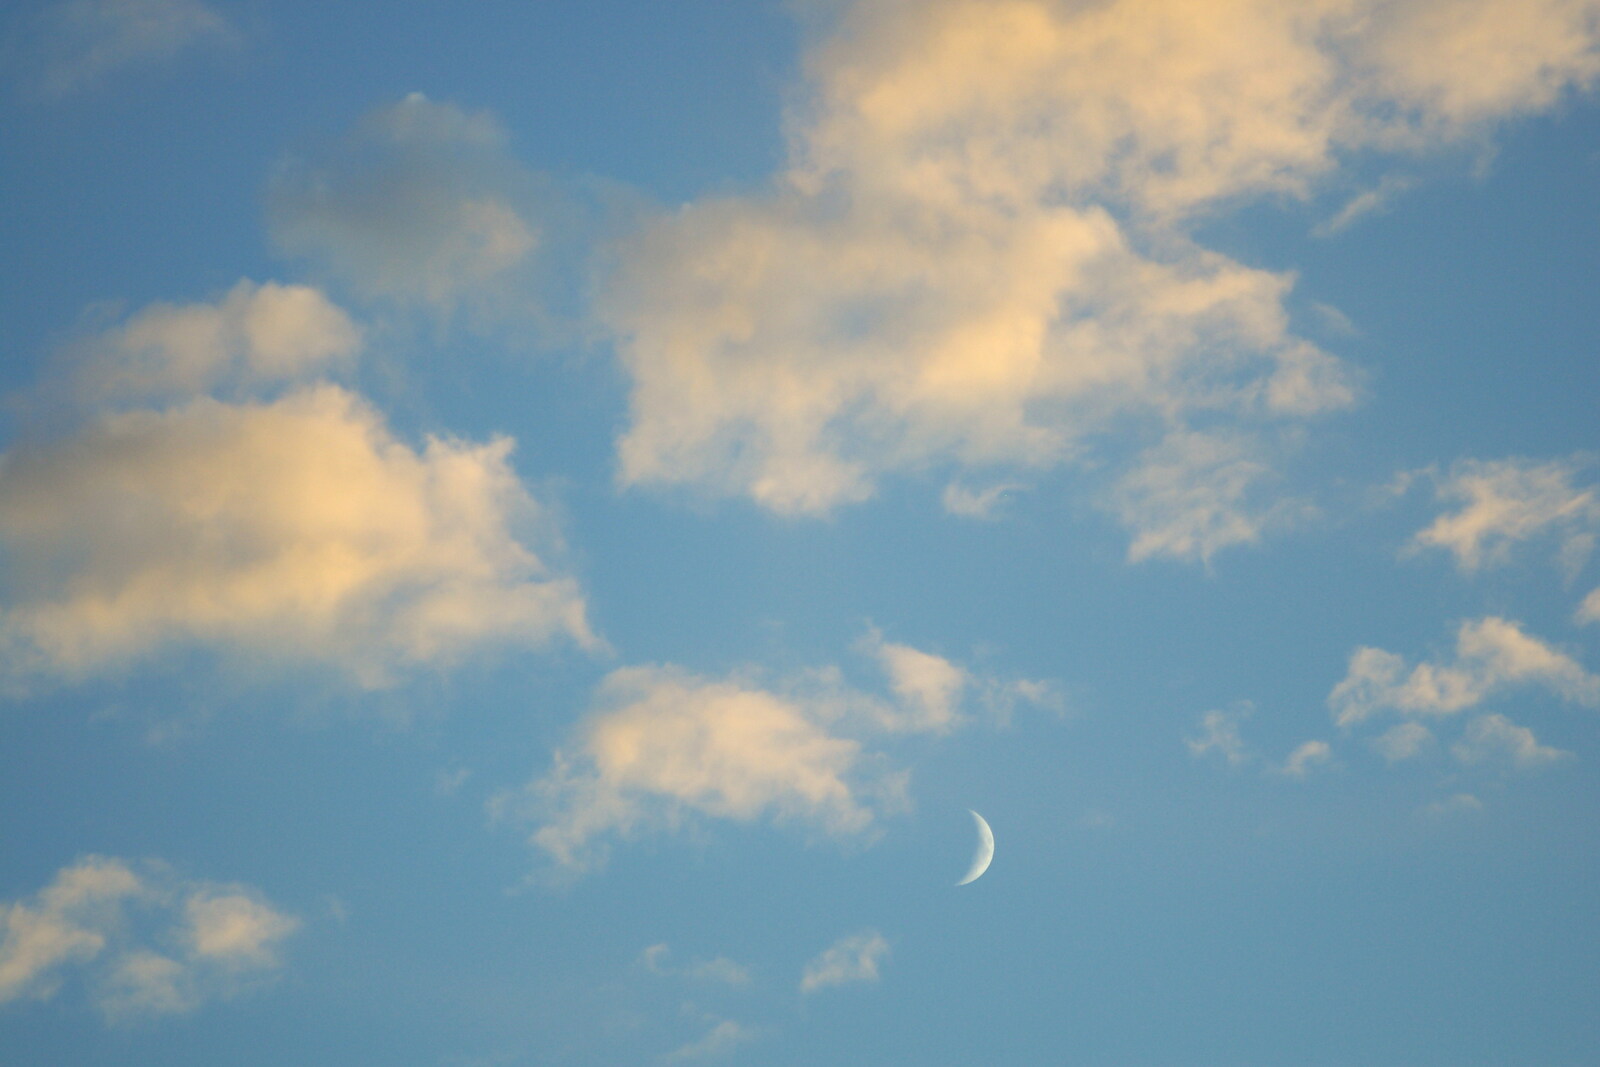 A sliver of moon from Steve Ives' Leaving Lunch, Science Park, Cambridge - 11th July 2005